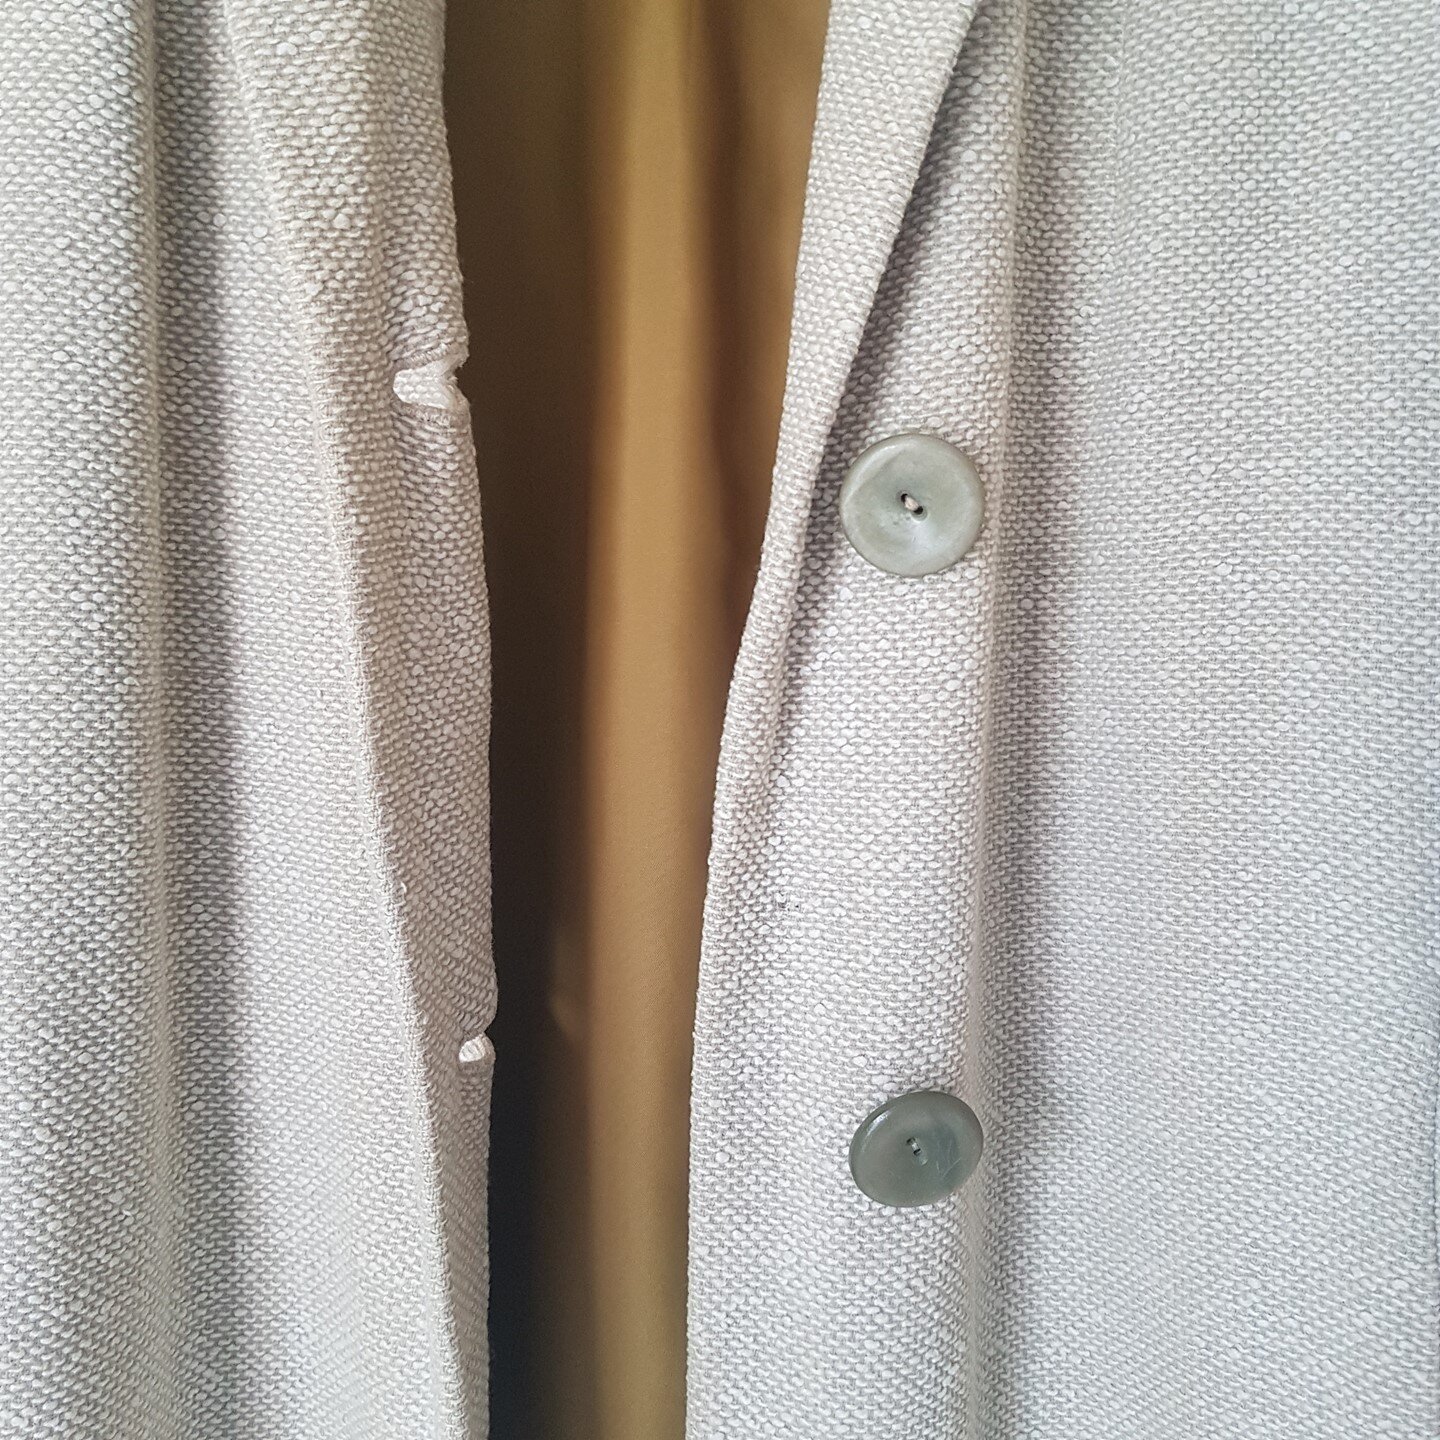 Is anyone loving this colour combination at much as me? 

Vintage coat coming soon. Yay! 

#greige #dotweave #palegrey #texturedcoat #vintage #olivegreen #barkersofkensington #color #vintagecoat #colours